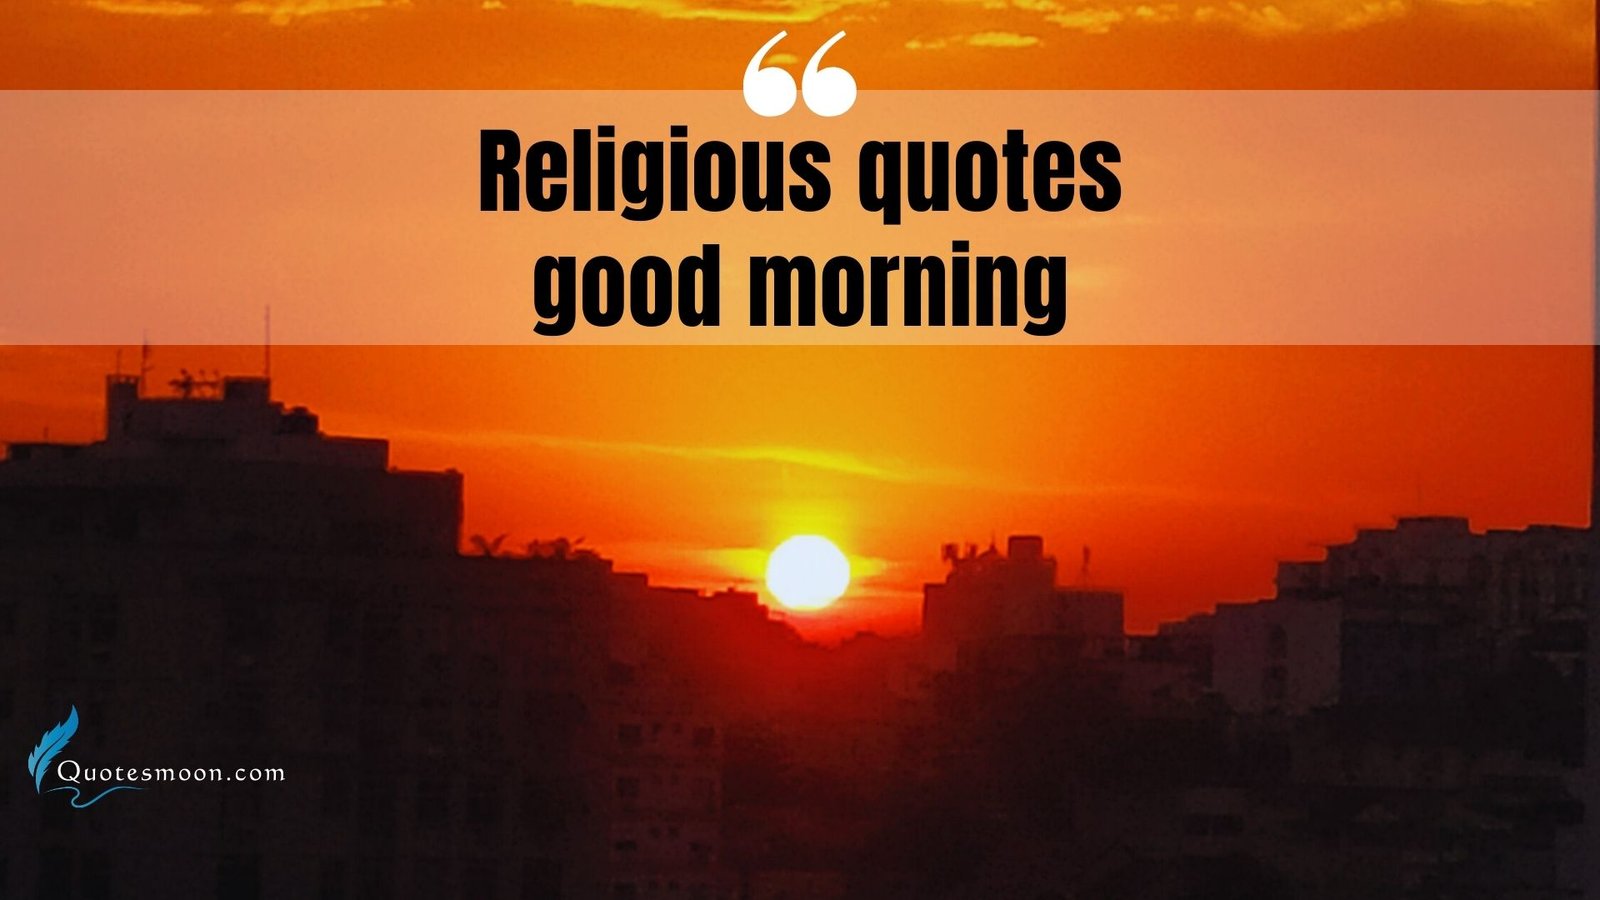 Religious quotes good morning